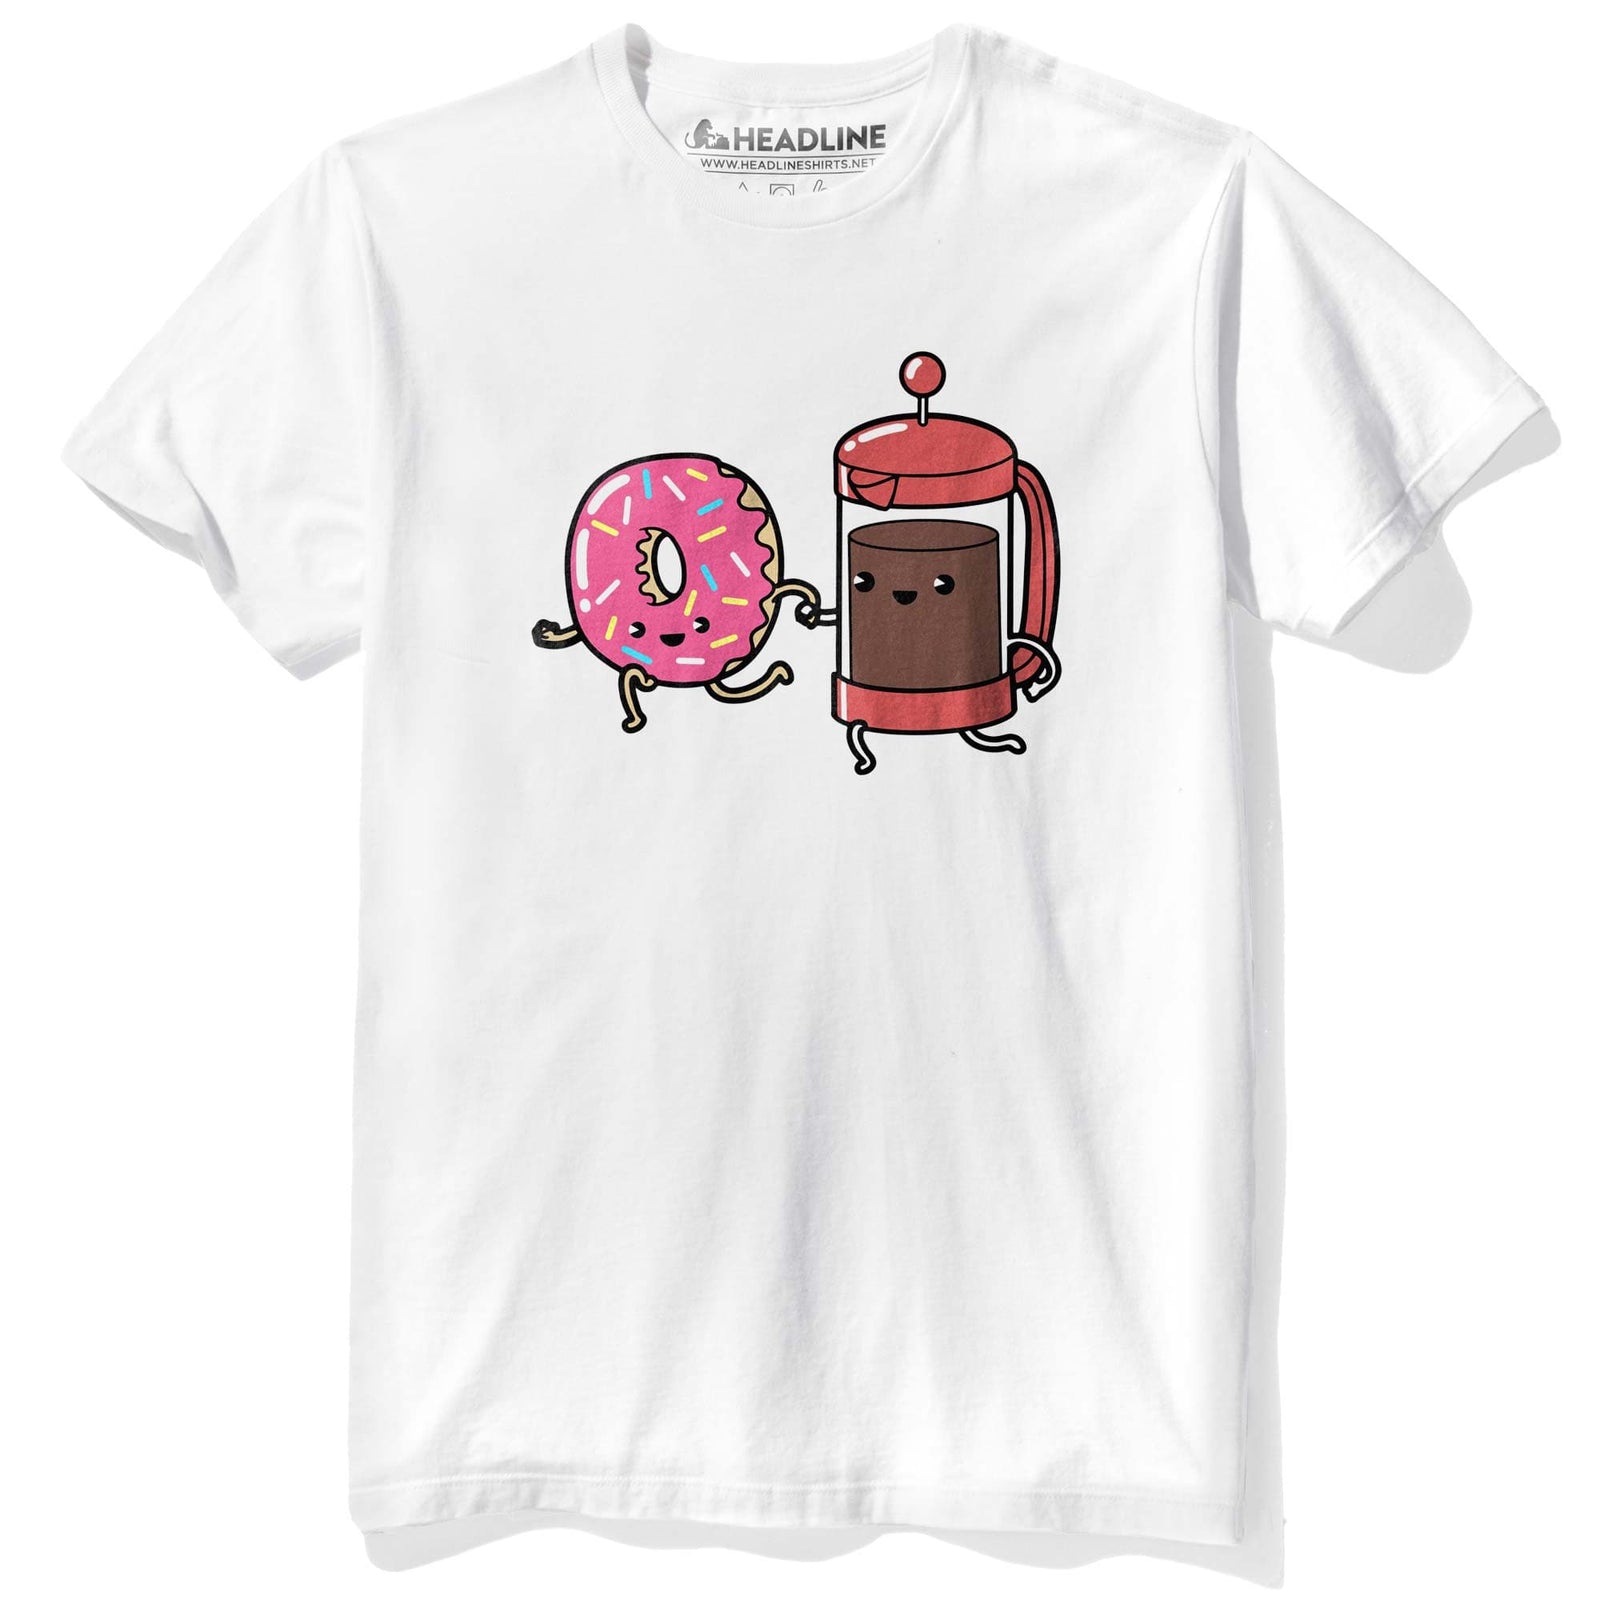 Men's Coffee & Donut Soulmates Designer Graphic T-Shirt | Funny Sprinkles French Tee | Solid Threads